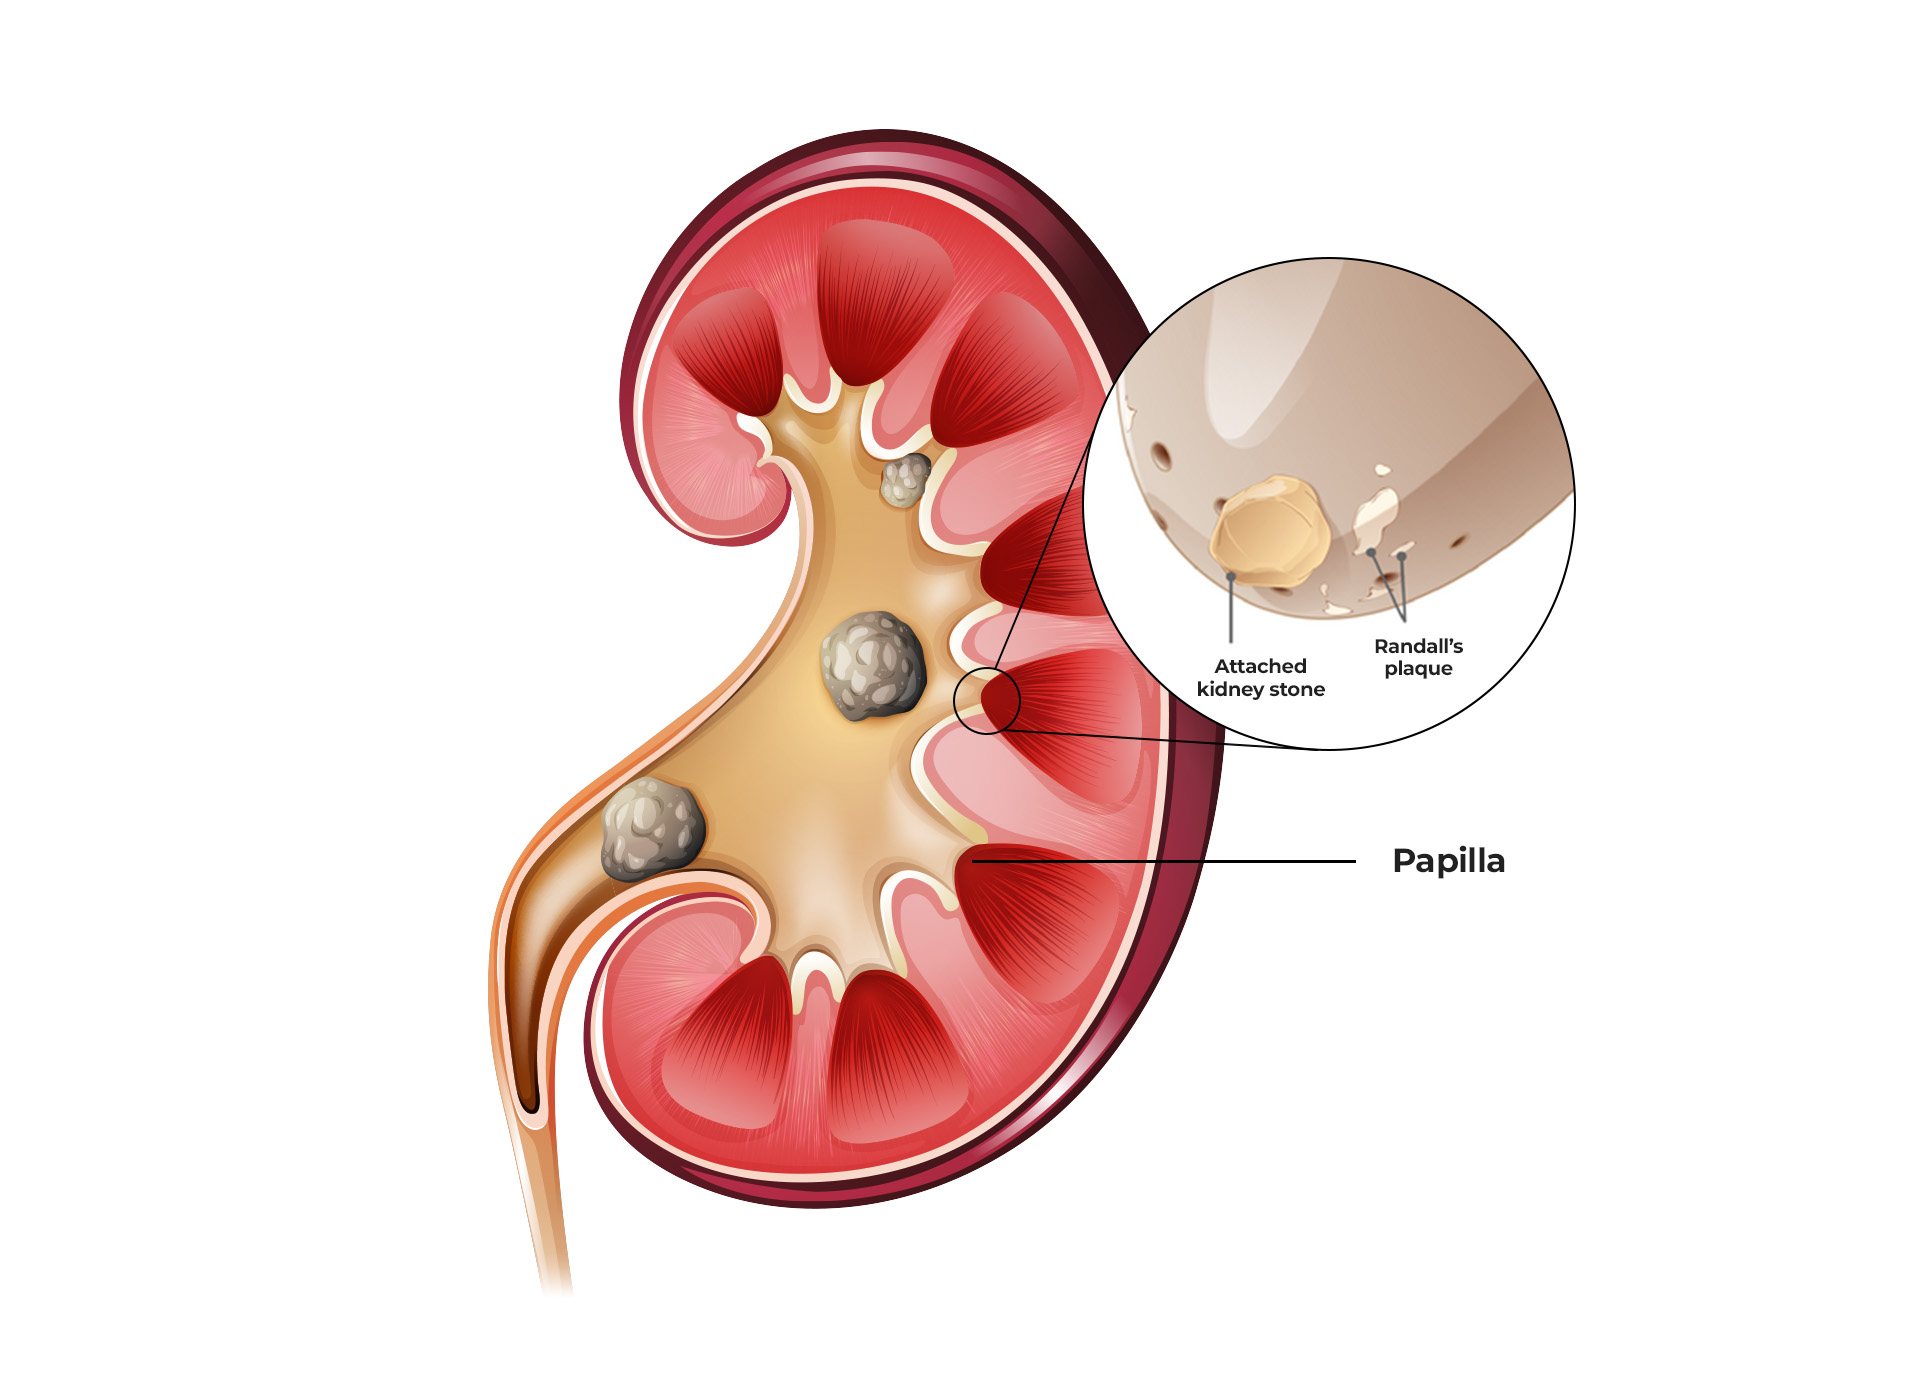 An illustration on how kidney stones form on Randall's Plaque.